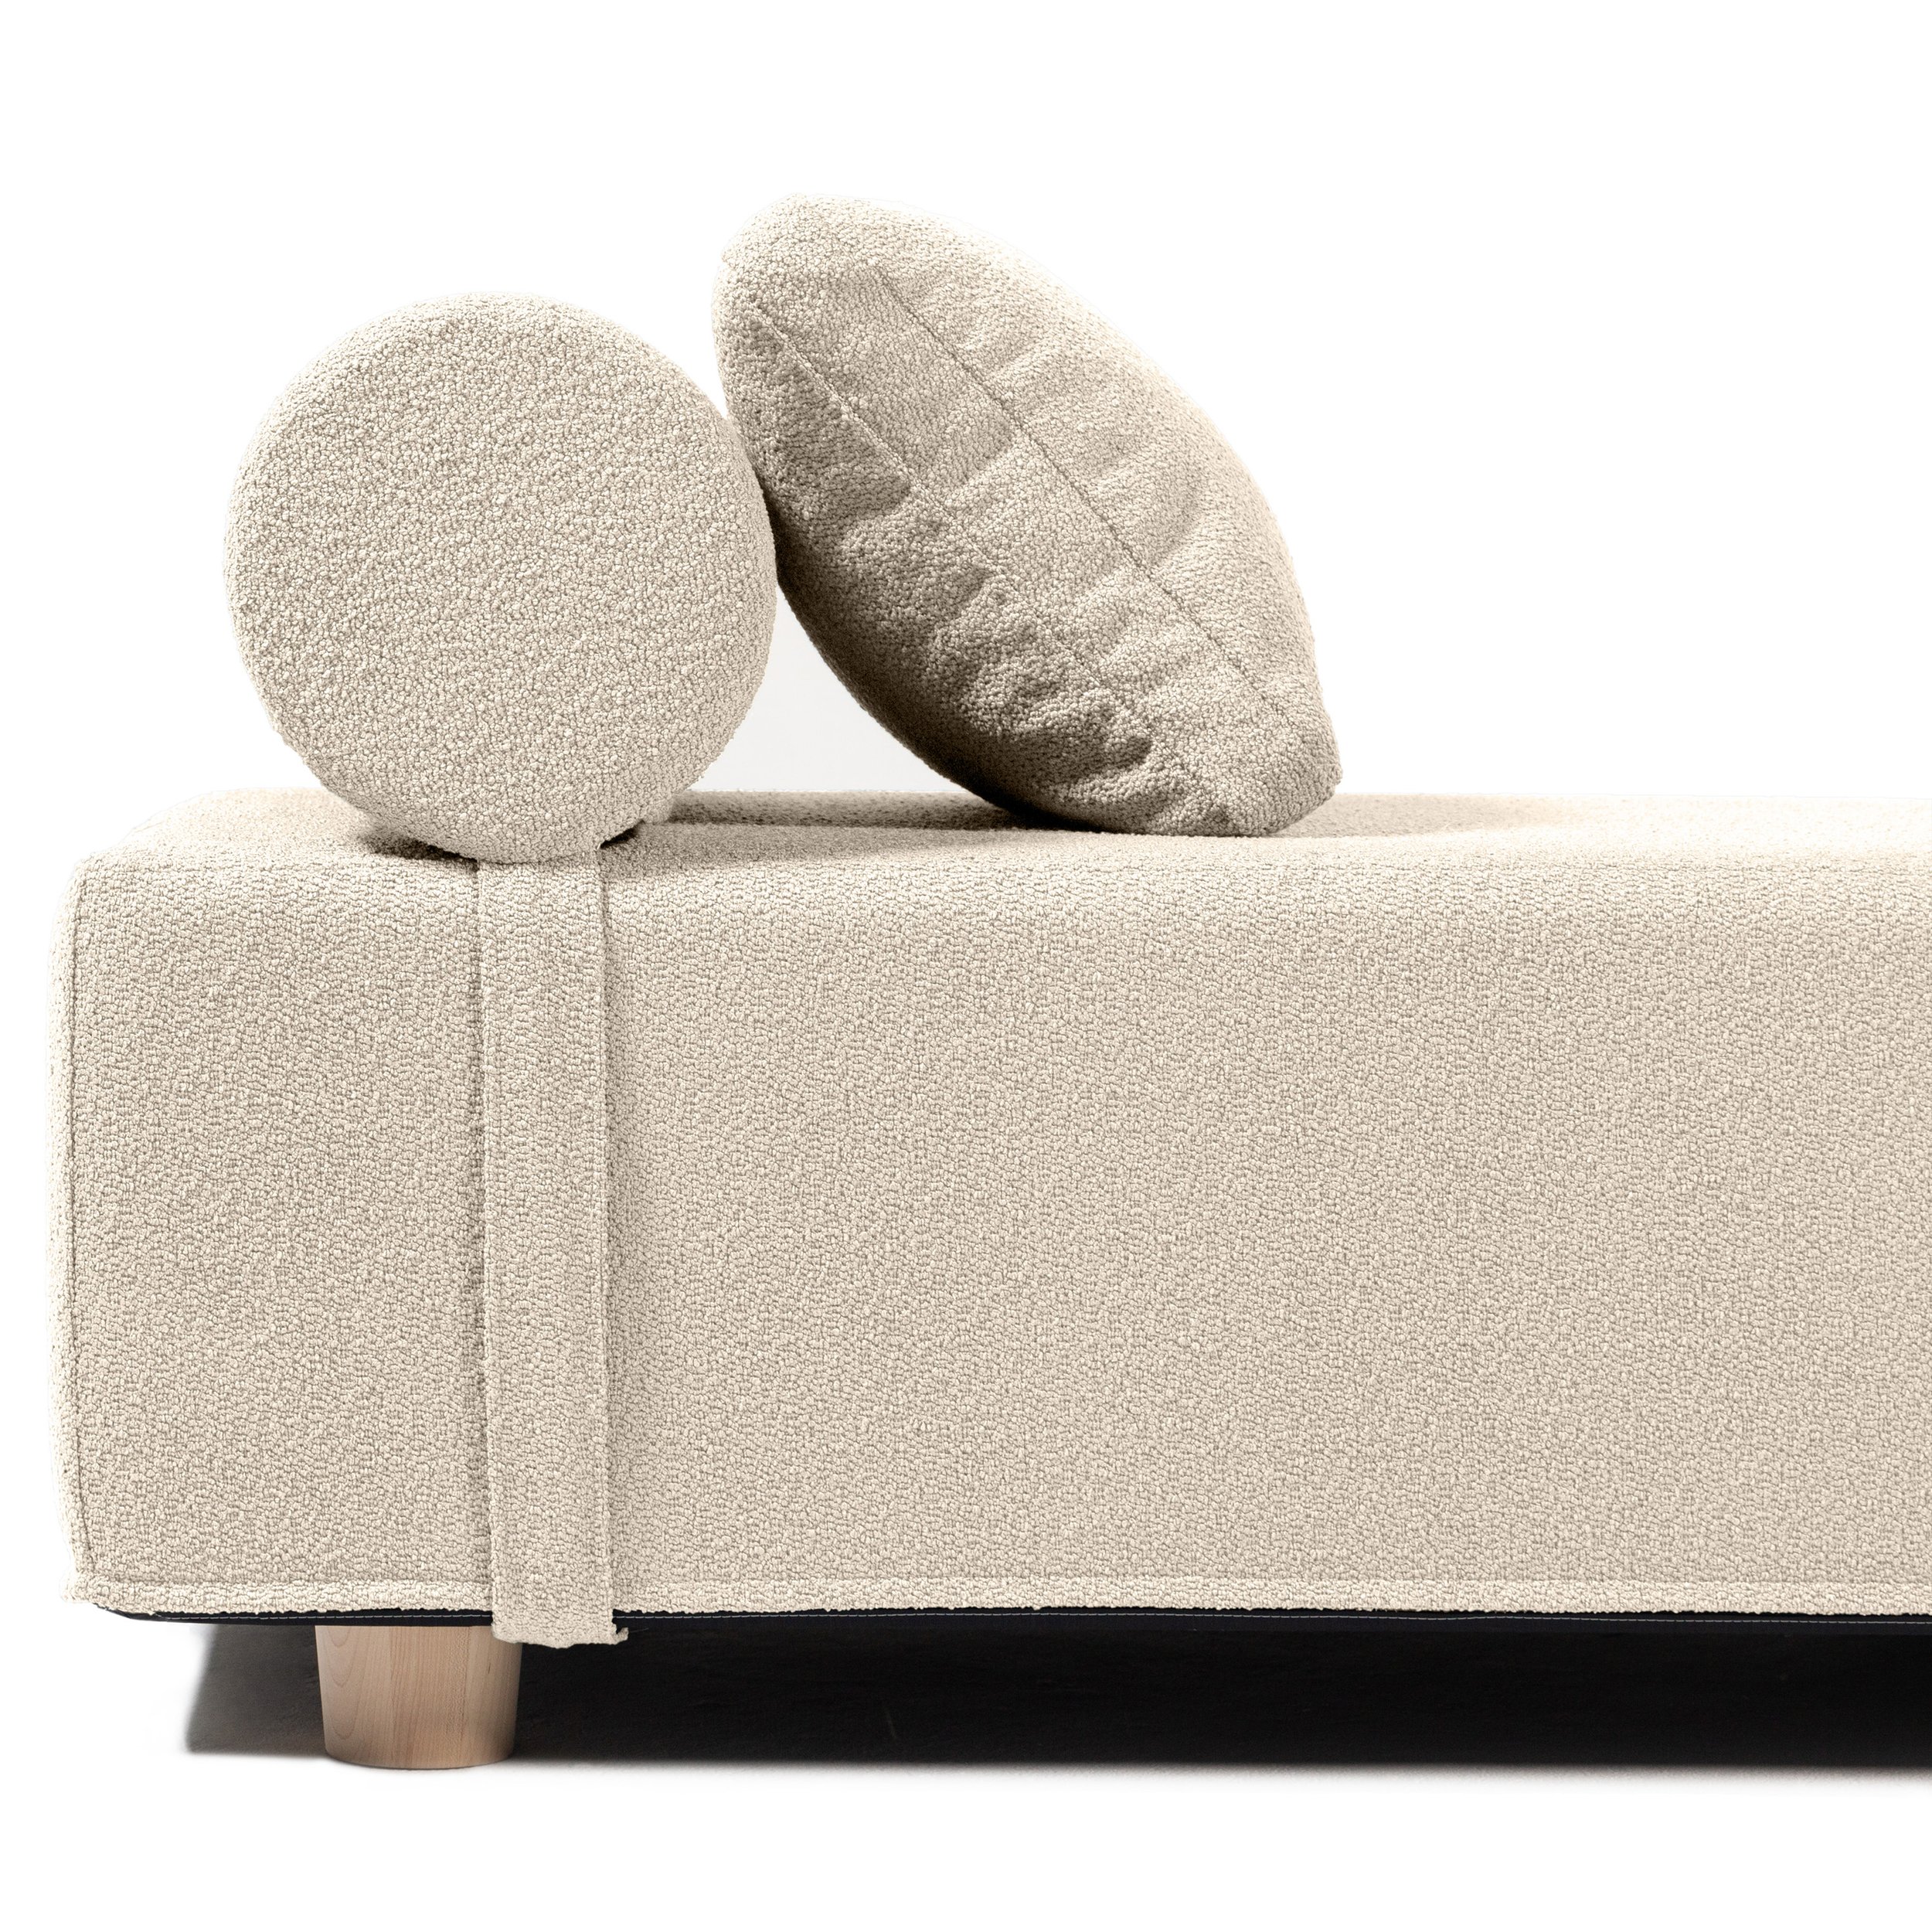 alvy-daybed-boucle-cream-gladys206-product-3-3000x3000.jpg